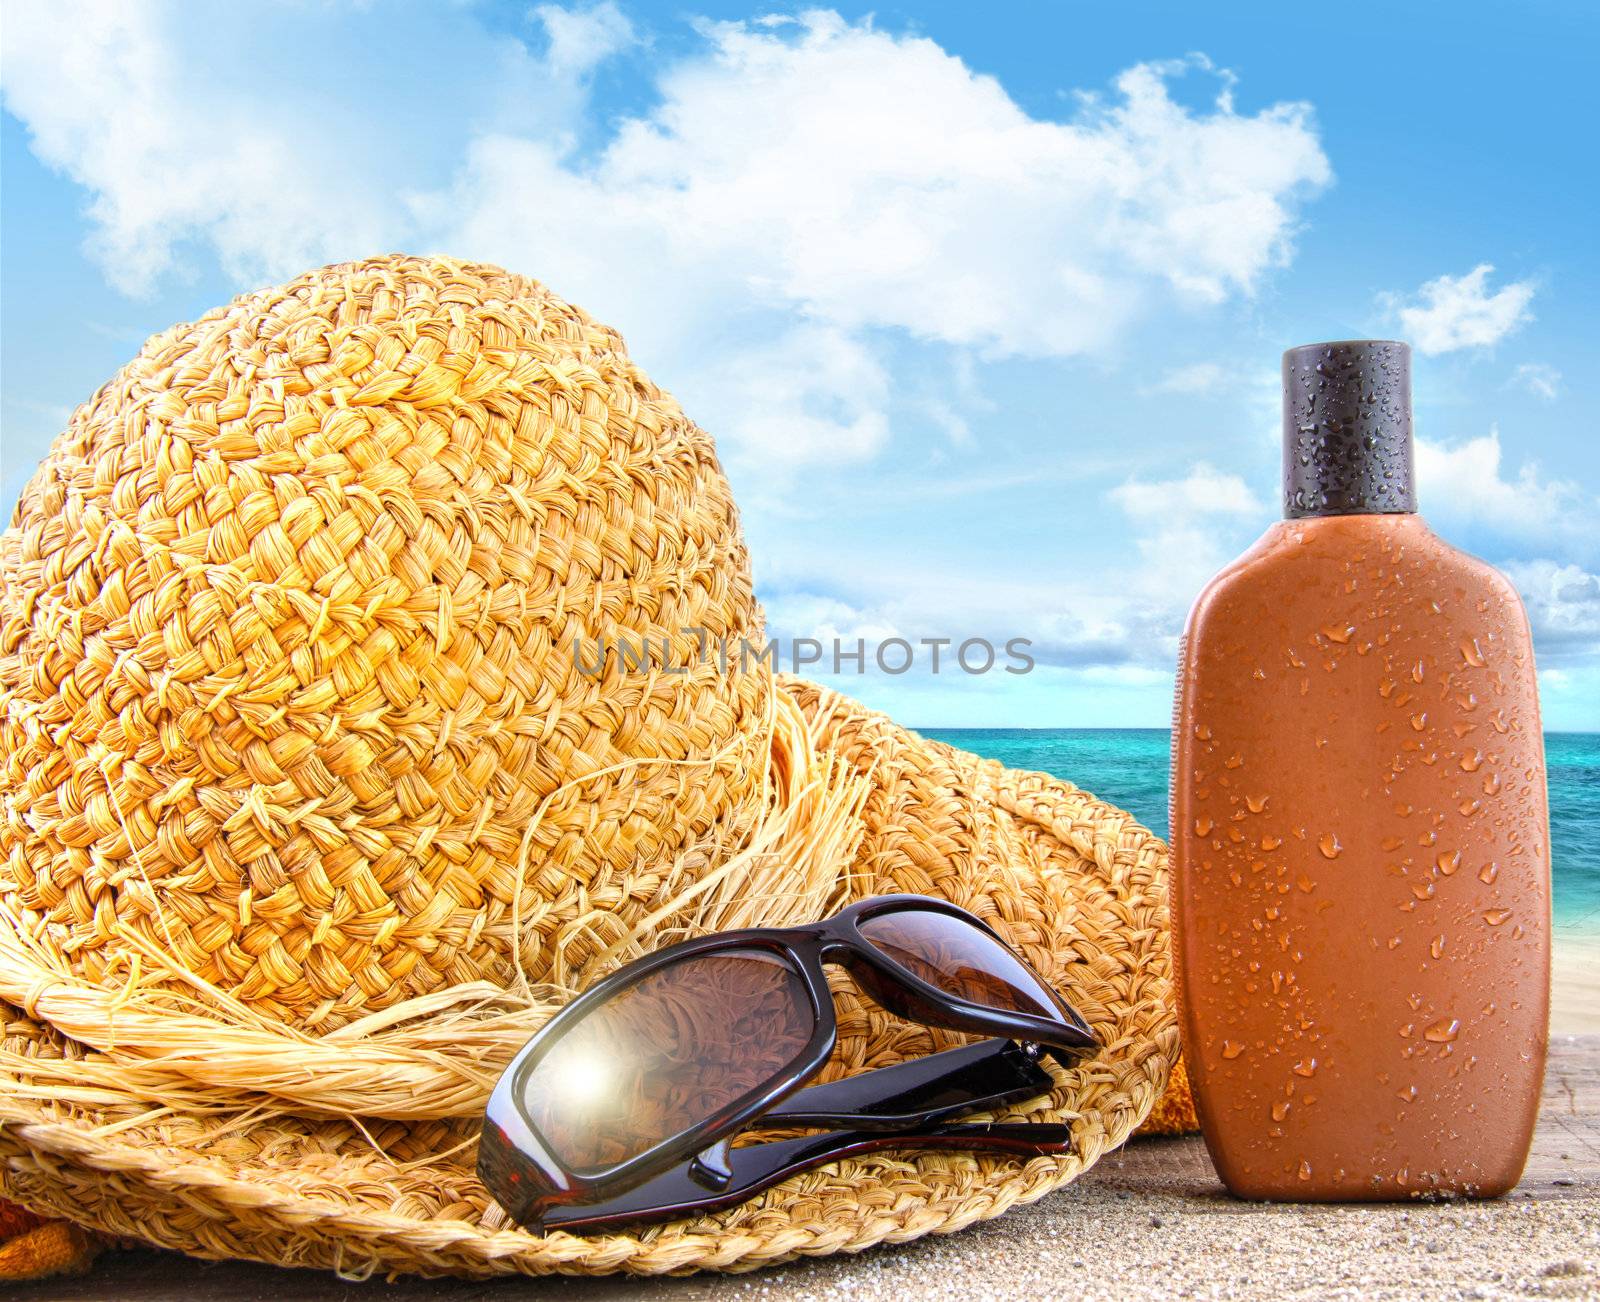 Beach items and suntan lotion at the beach by Sandralise